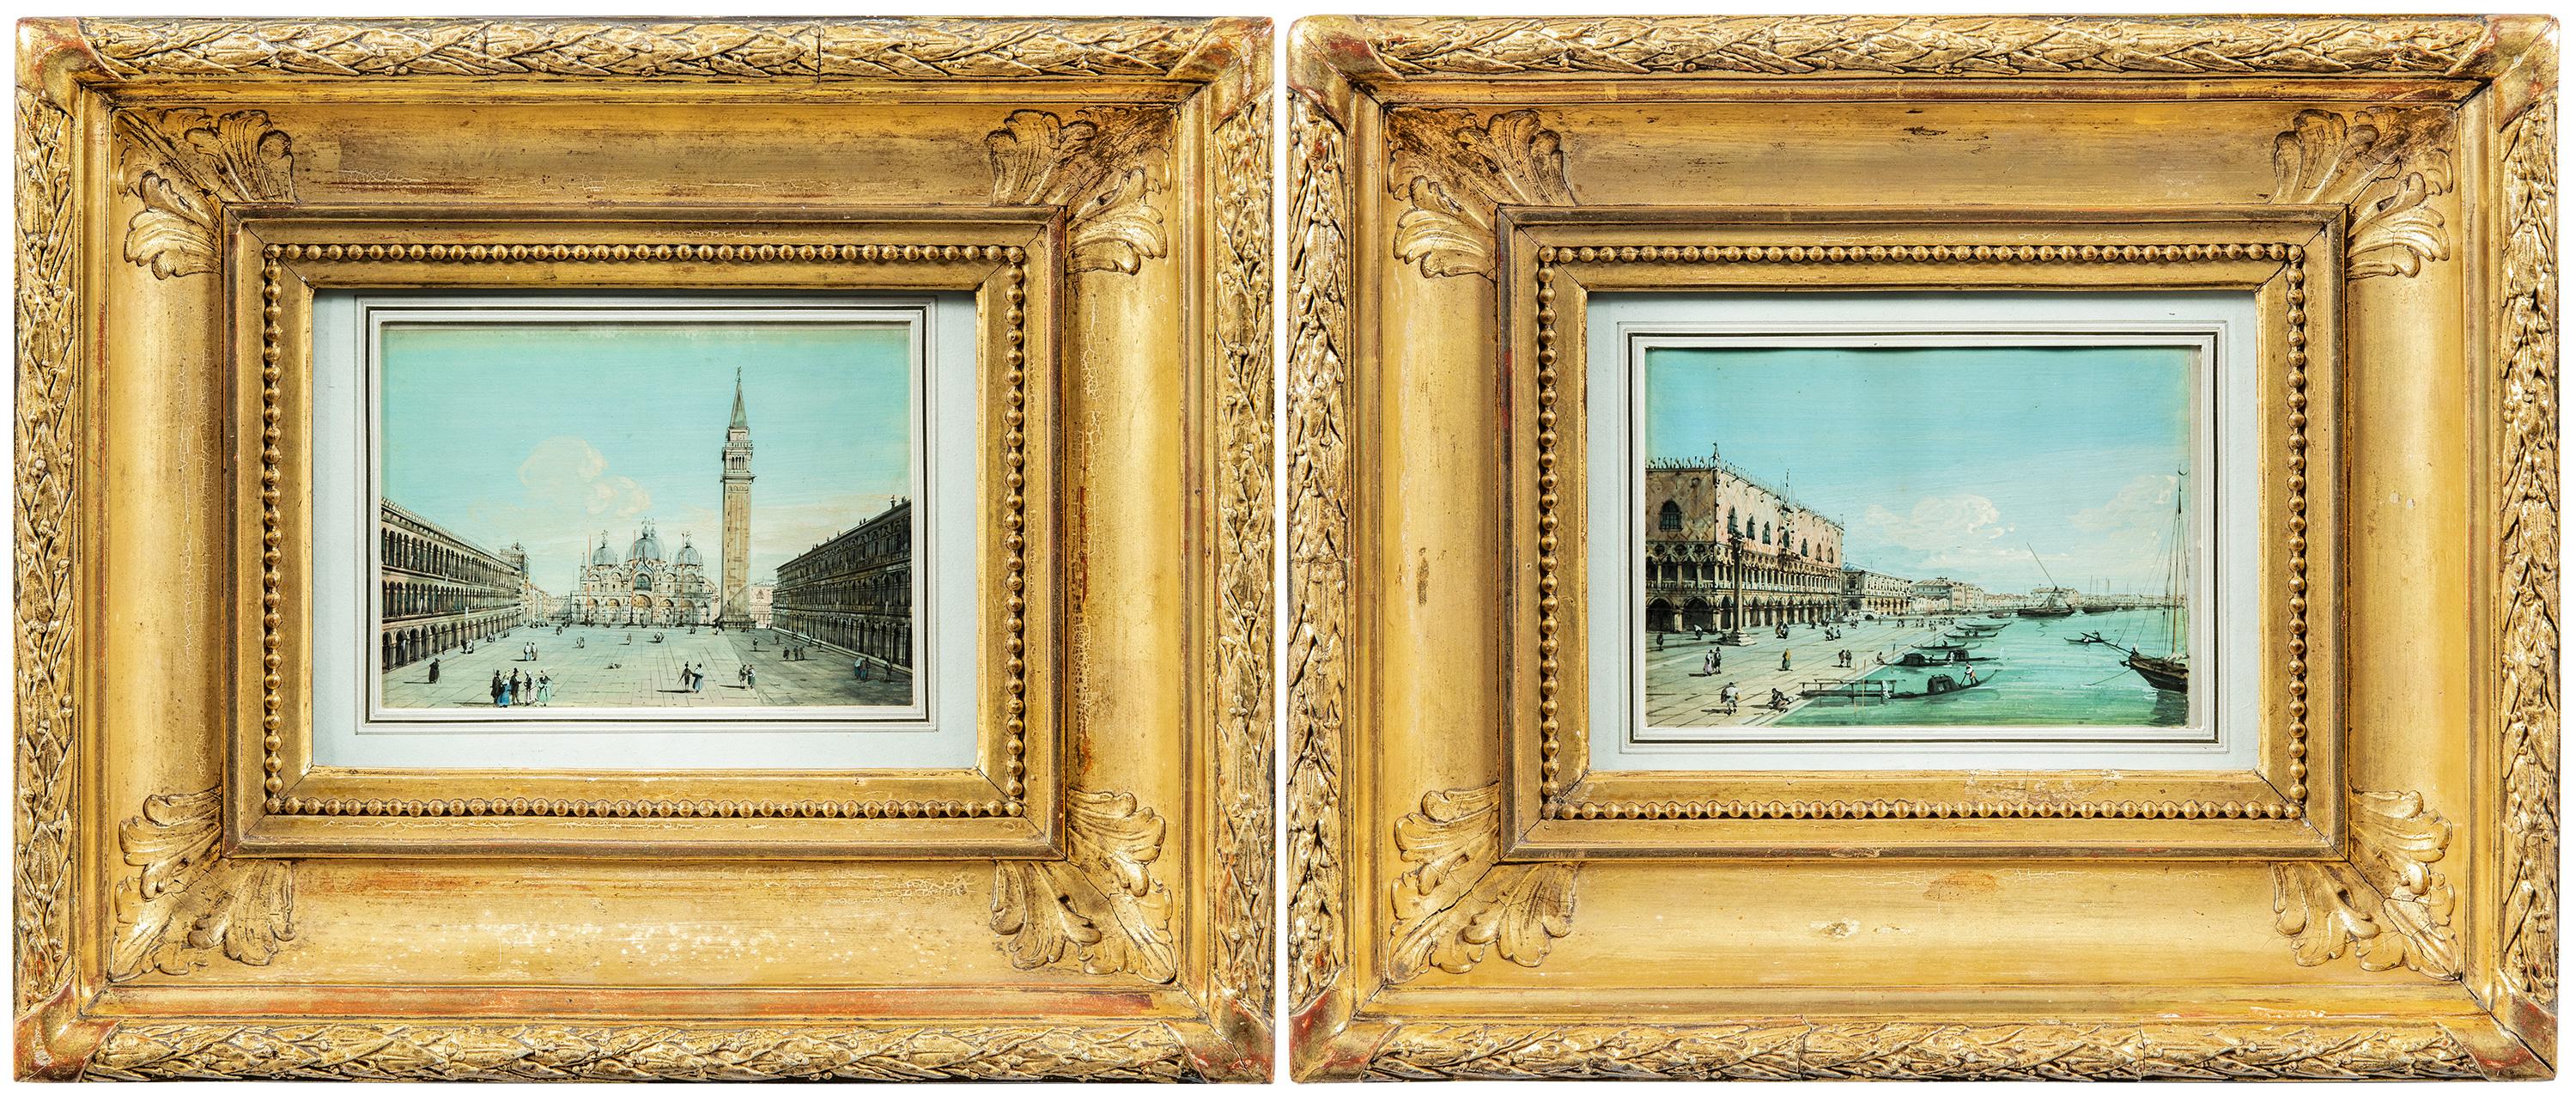 Carlo Grubacs (Perasto 1801 - Venice 1870) - Venice, pair of views of Piazza S. Marco and the Basin towards the Riva degli Schiavoni.

11 x 16 cm without frame, 29.5 x 34.5 cm with frame.

Ancient tempera paintings on paper, in ancient carved and